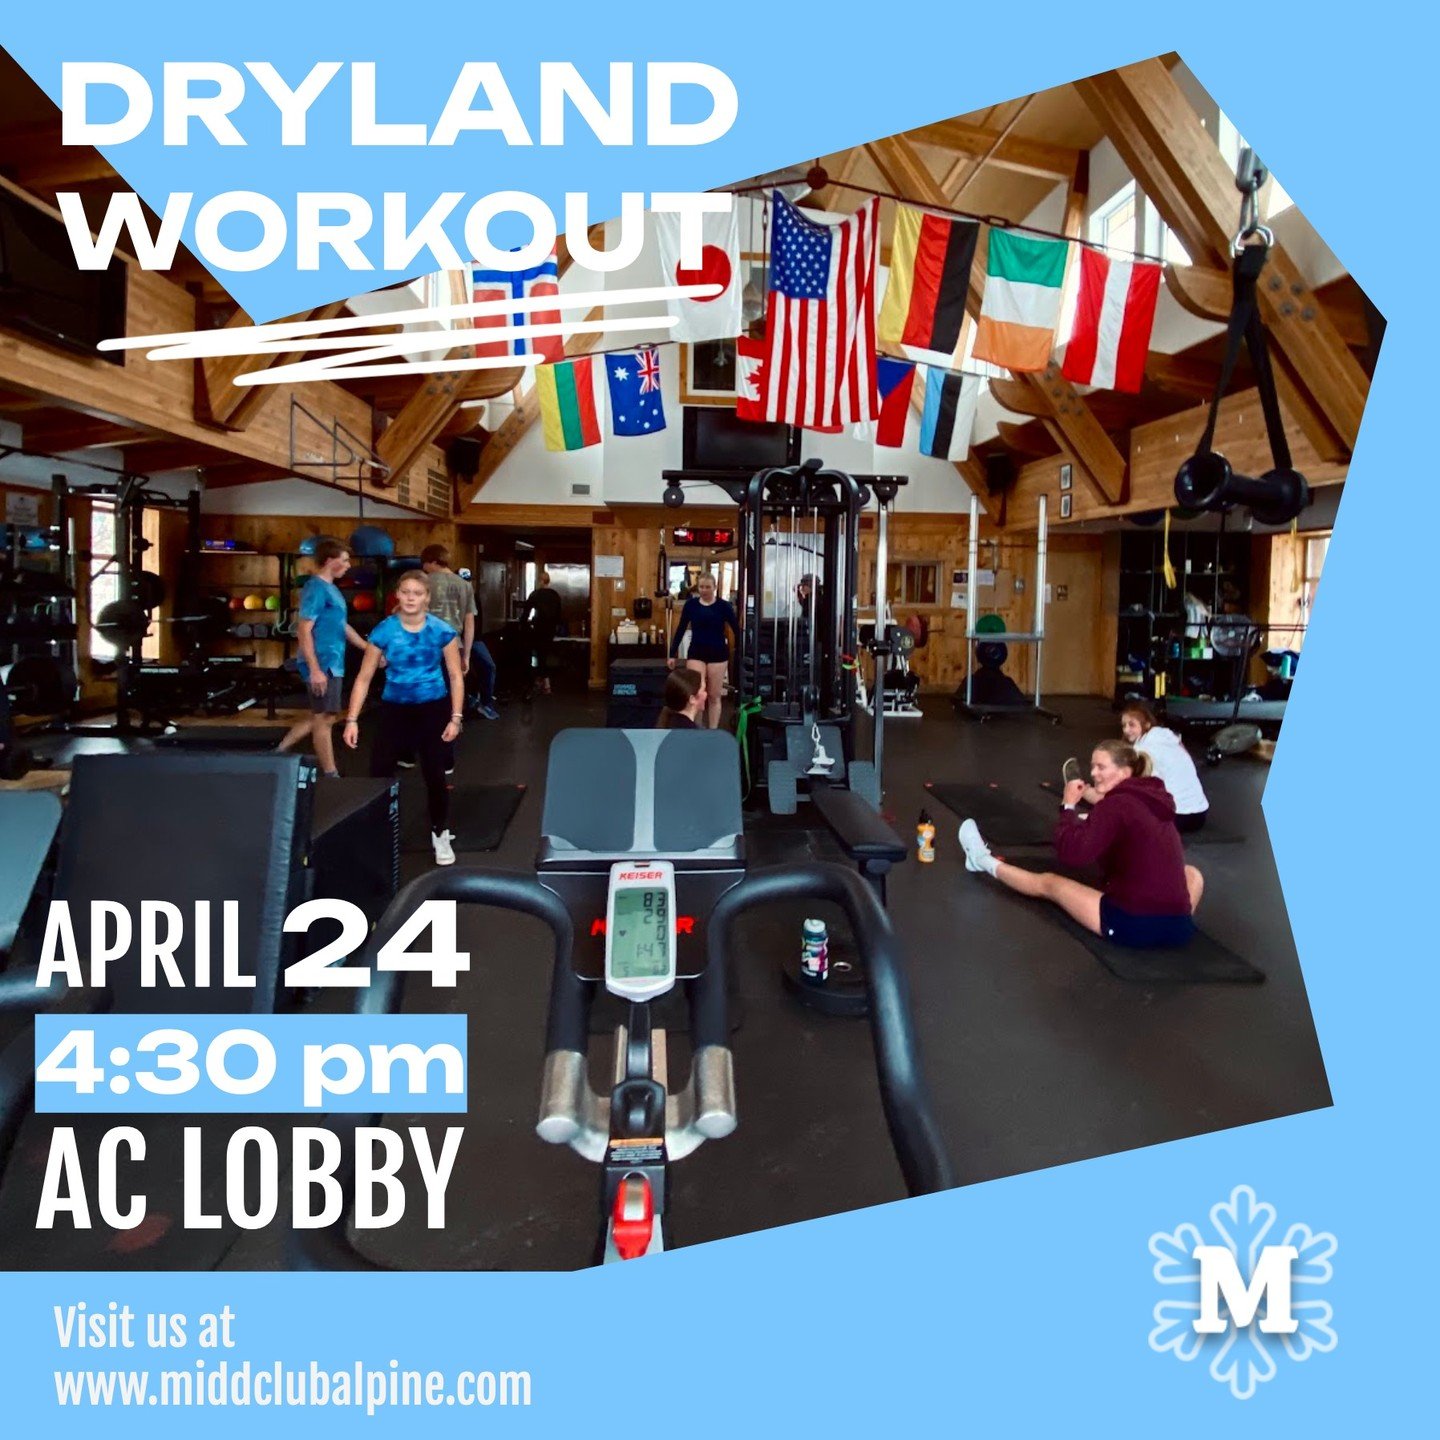 Our first official dryland workout will be Wednesday, April 24th at 4:30 pm. Meet us in the lobby of the AC and get ready for a great workout with teammates. 

Go panthers!